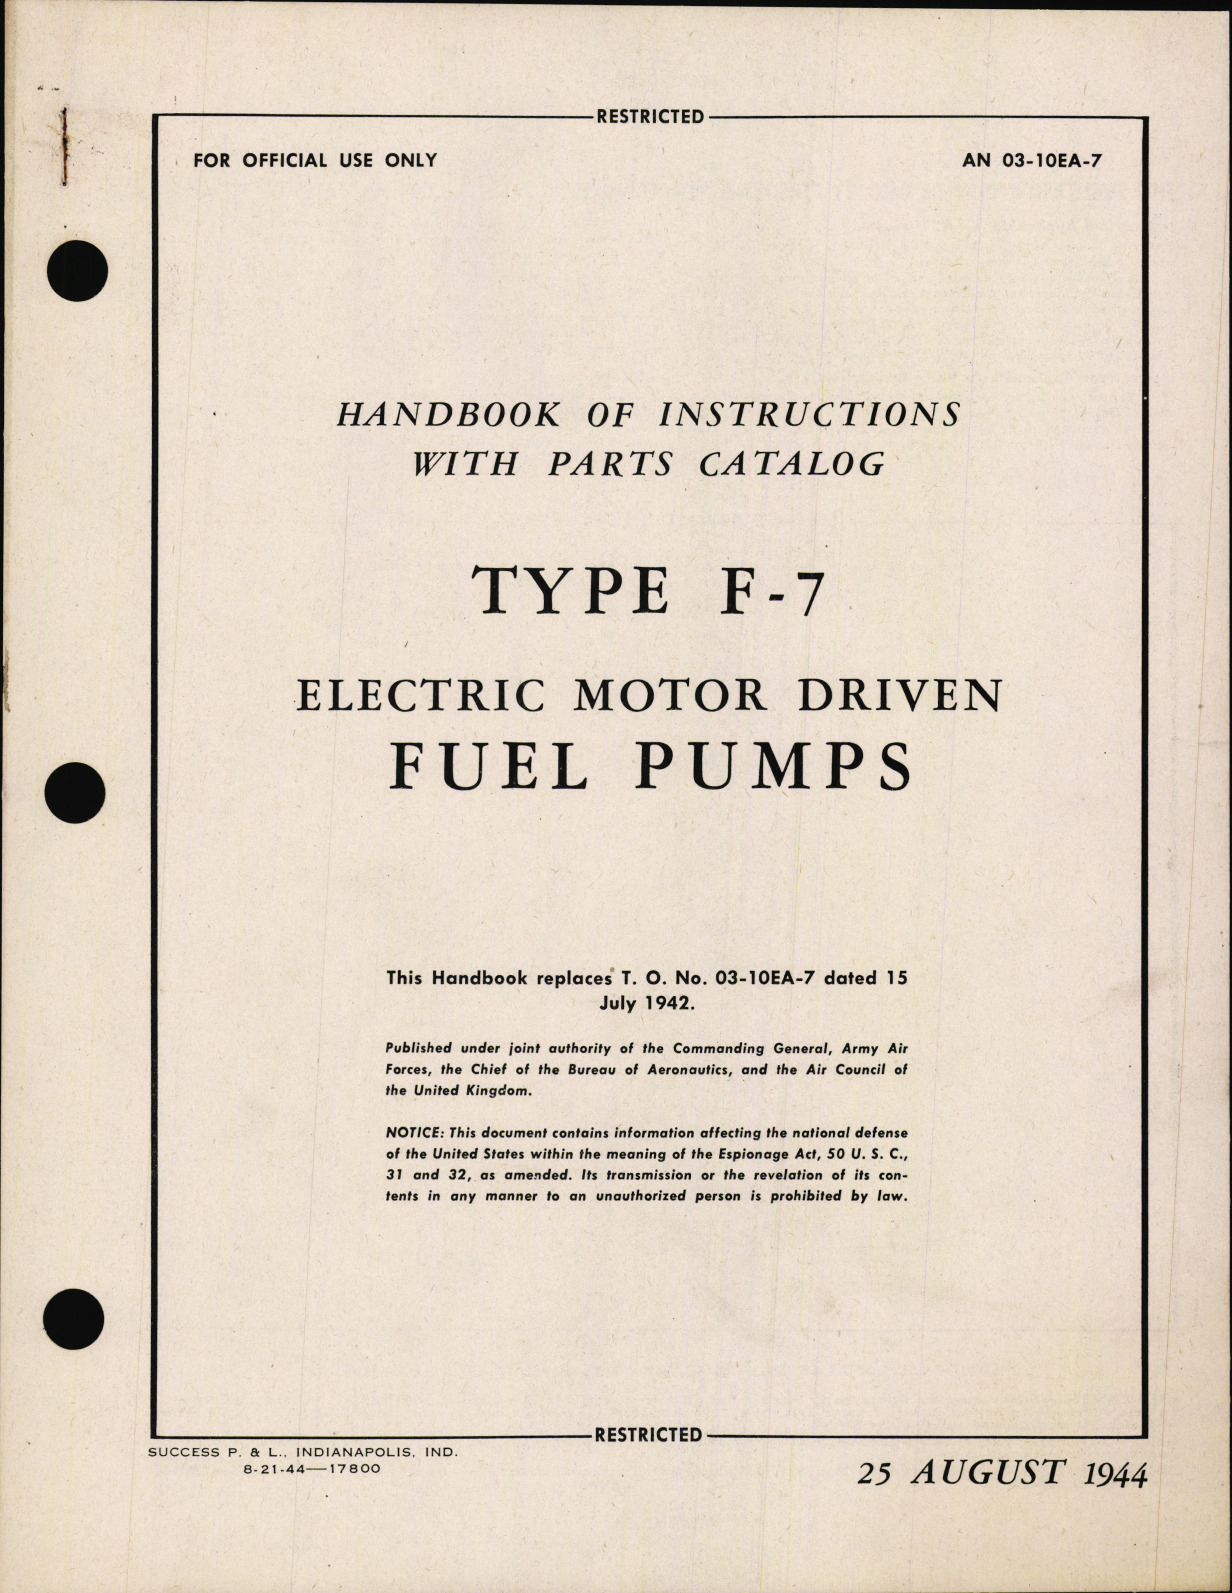 Sample page 1 from AirCorps Library document: Handbook of Instructions with Parts Catalog for Type F-7 Electric Motor Driven Fuel Pumps